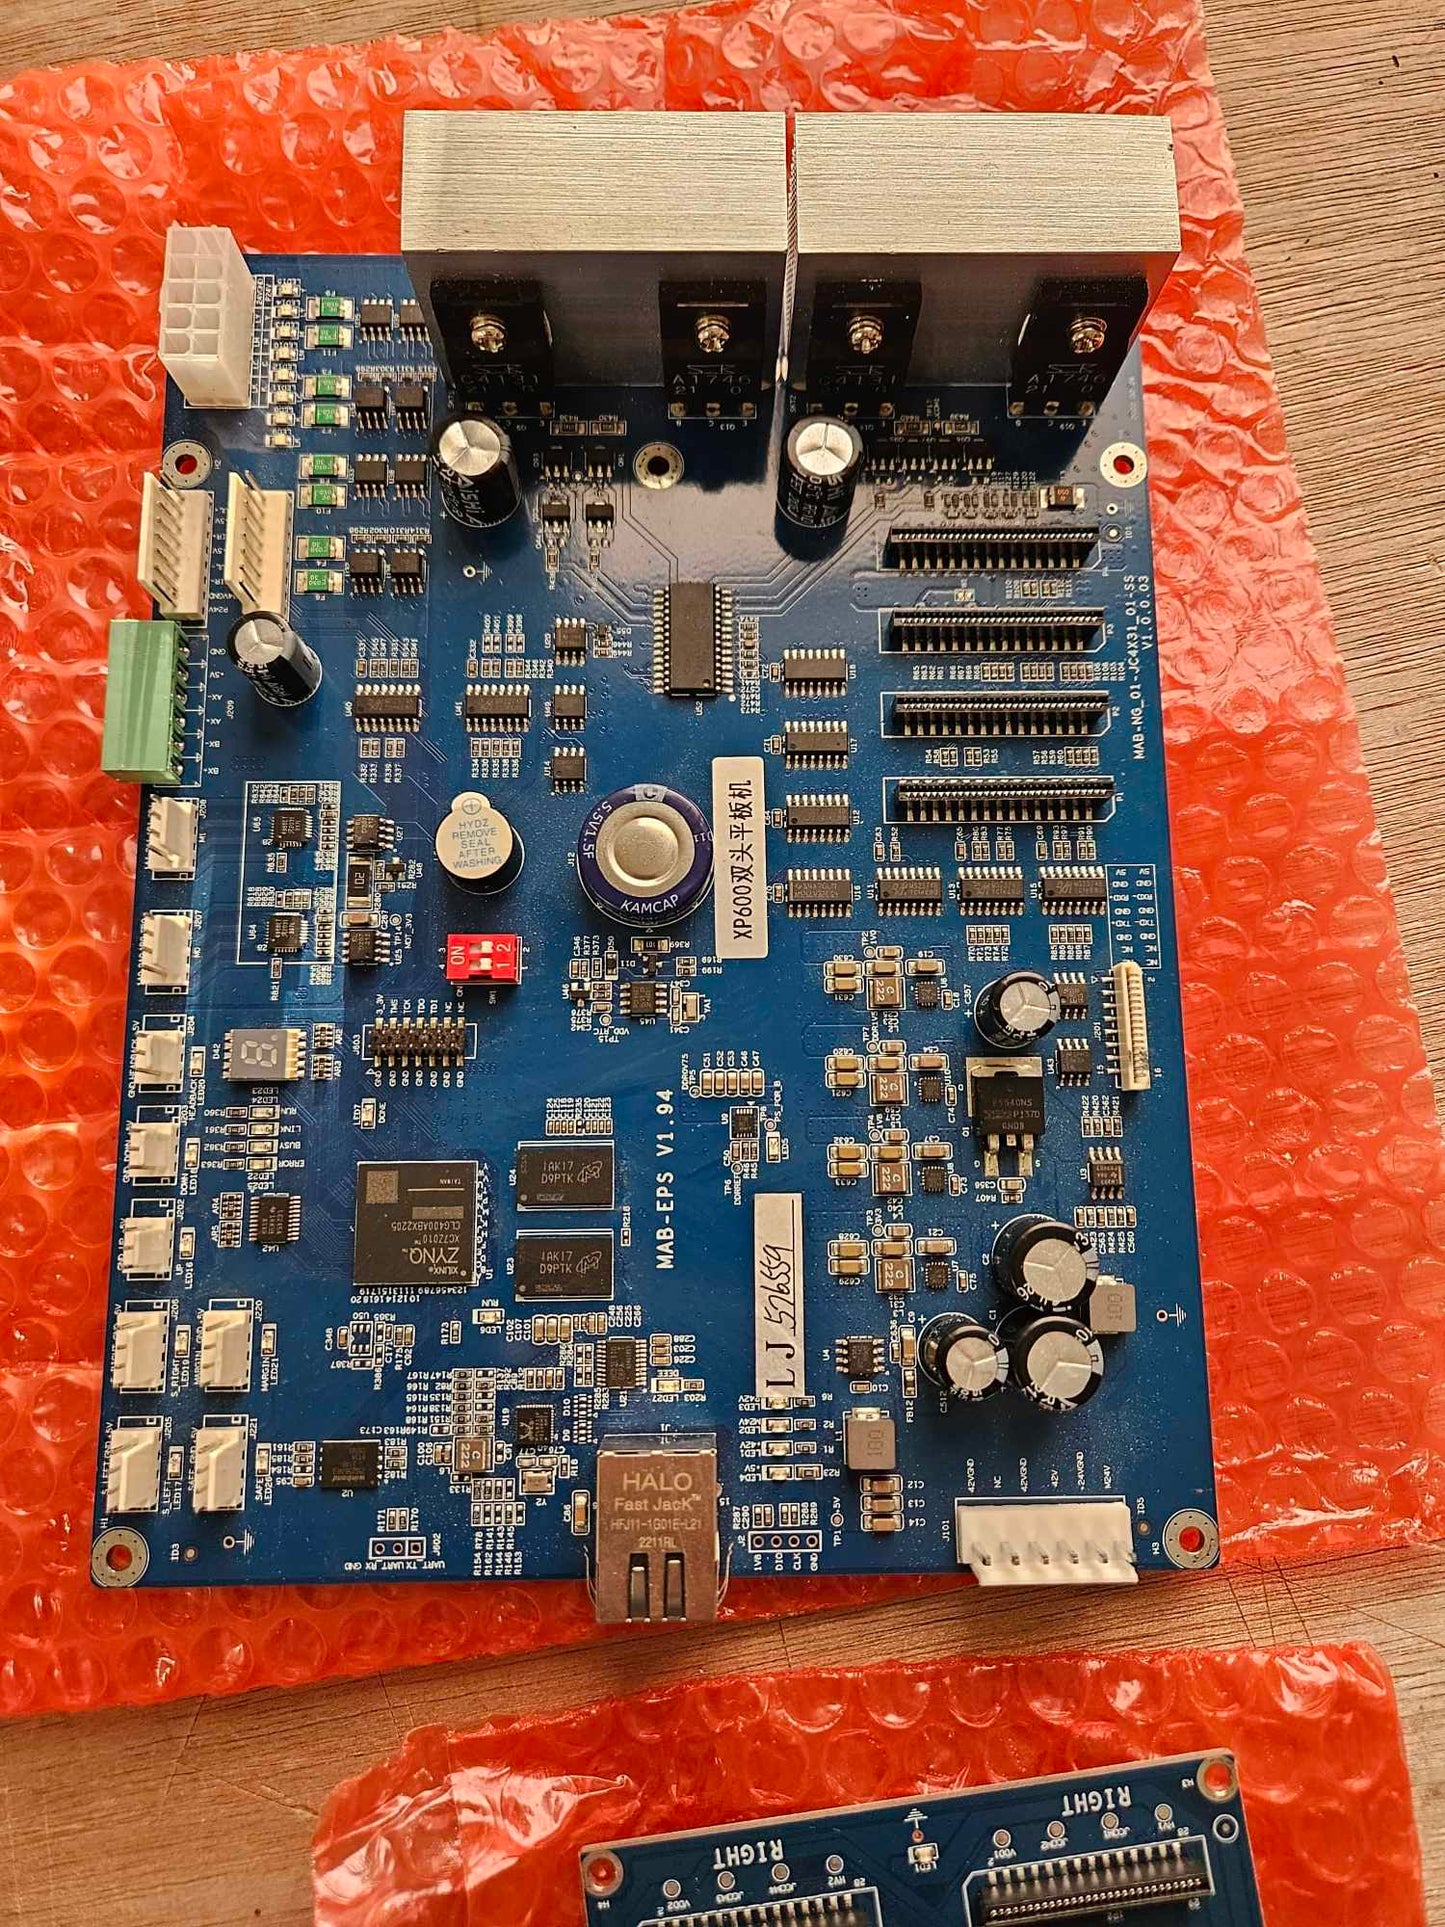 Hoson main motherboard and printhead board for xp600 V 1.94